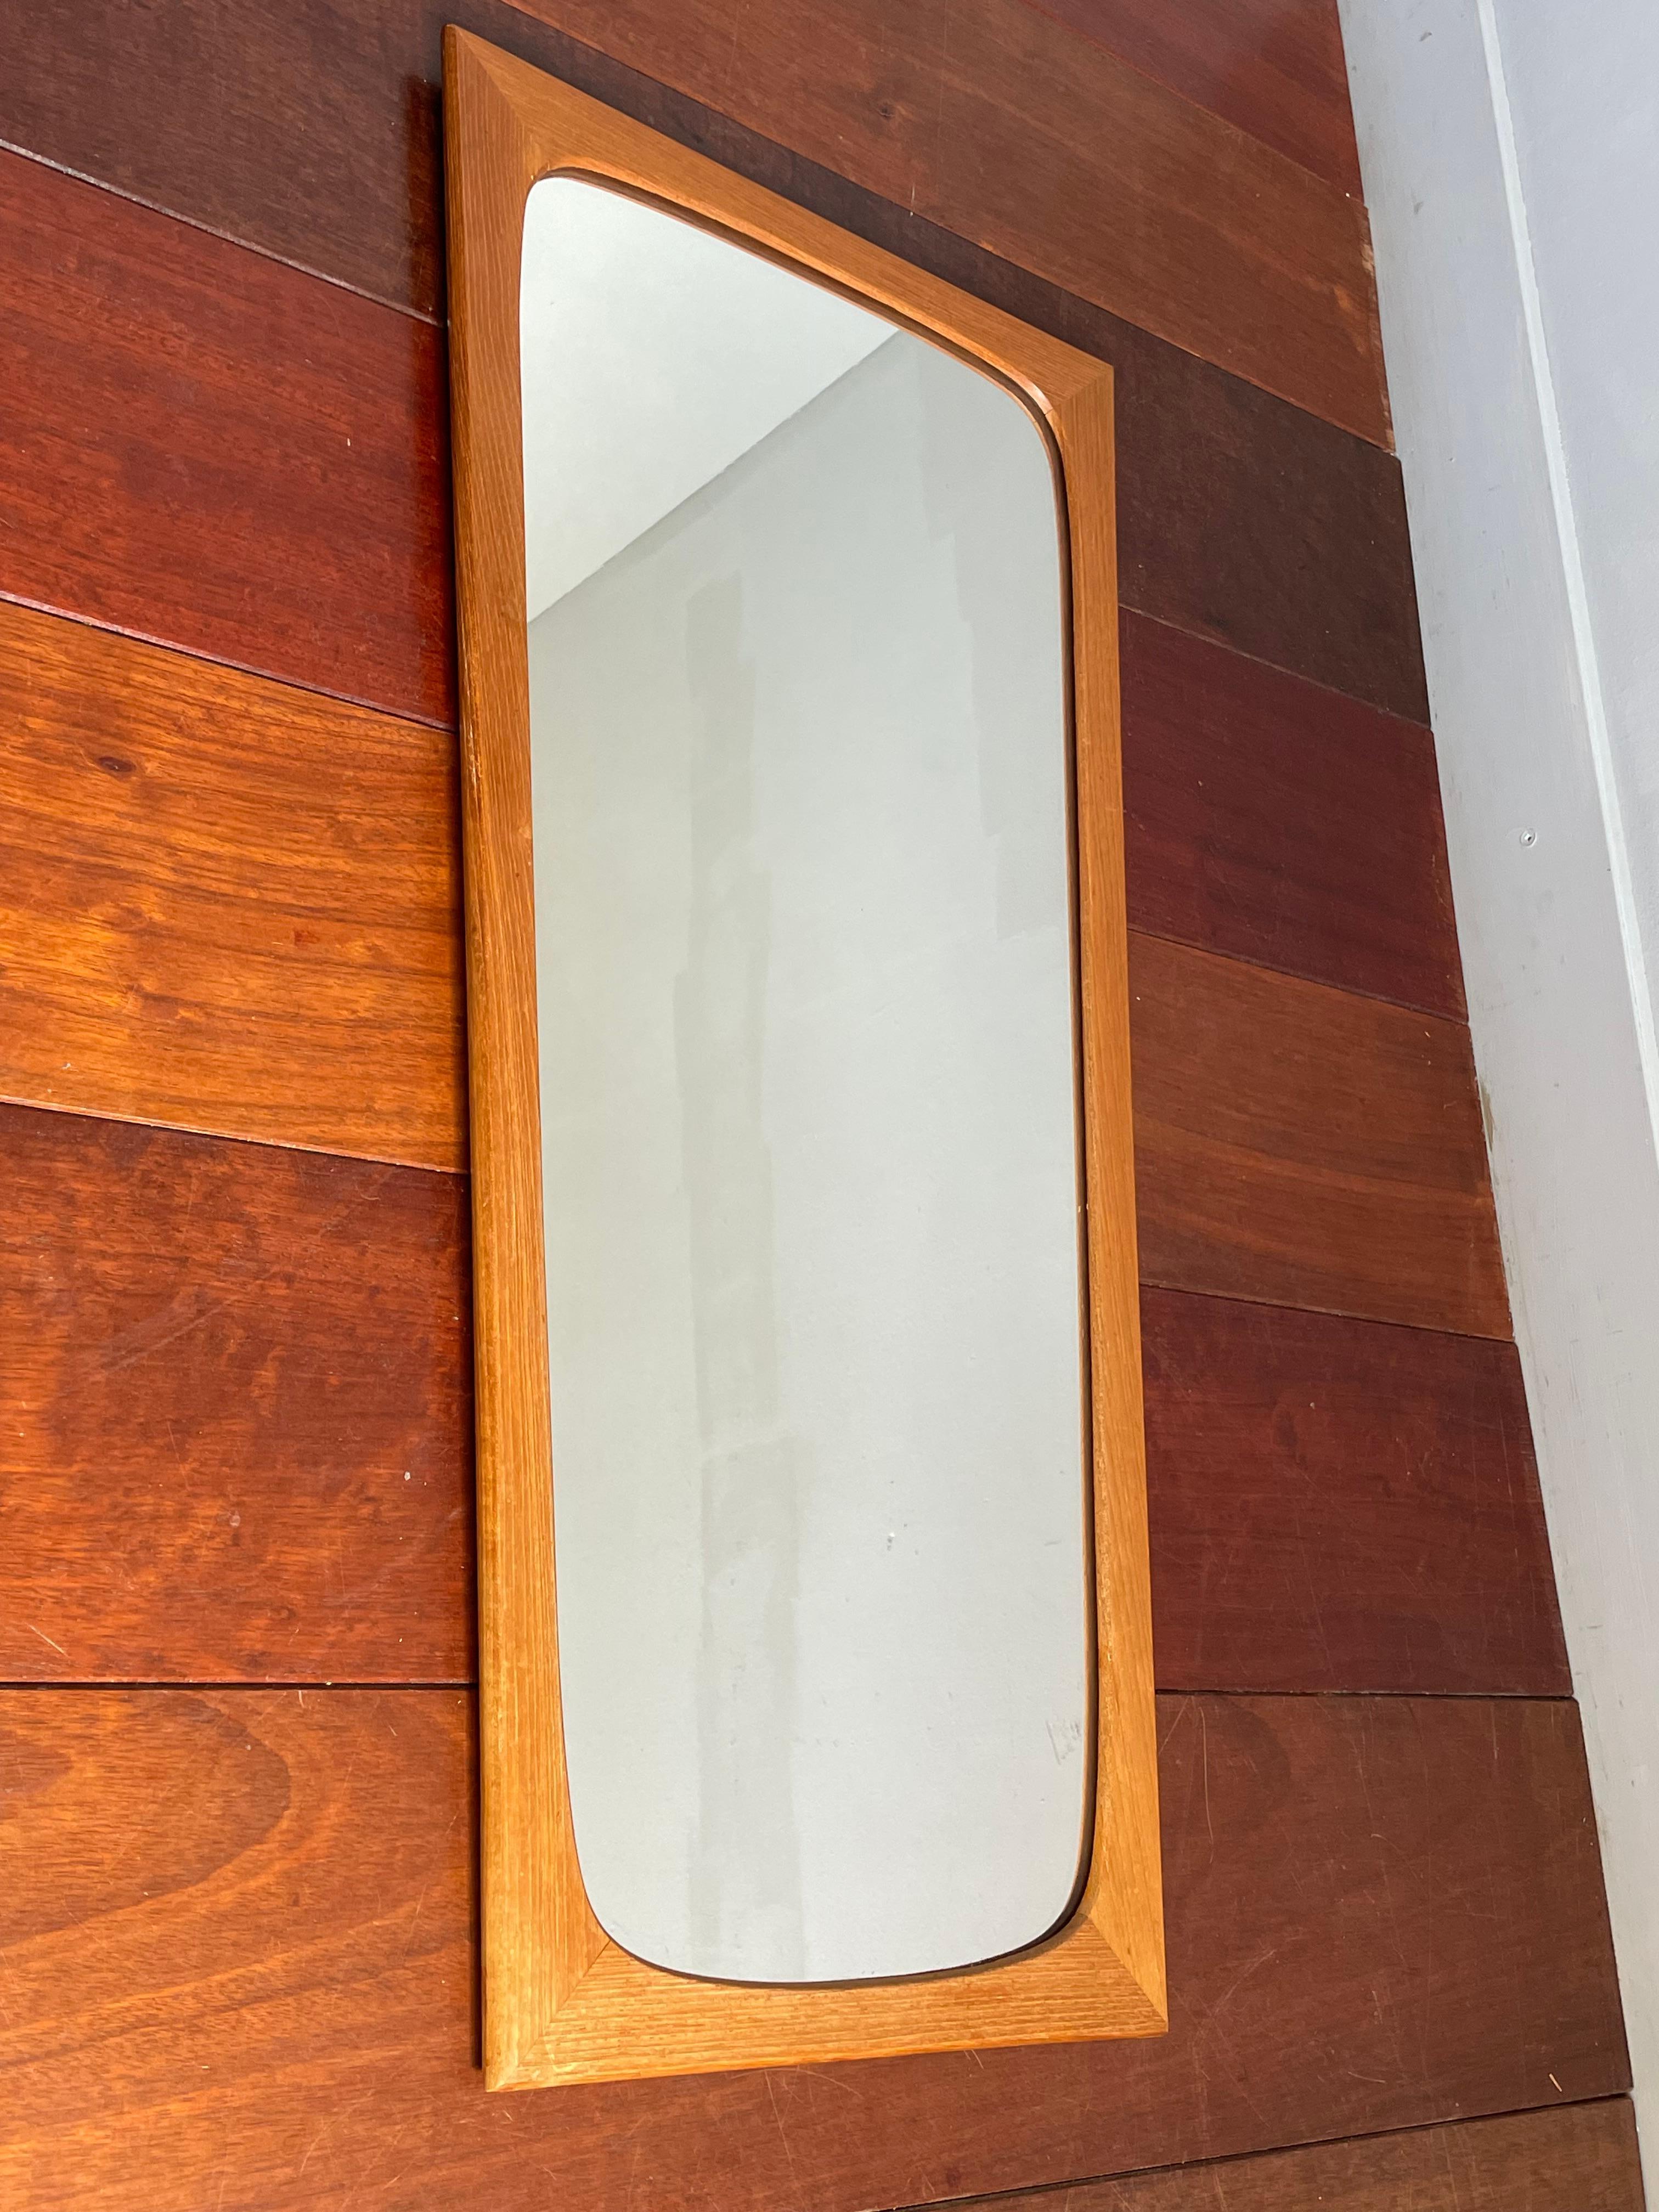 Rare Mid-Century Modern Wall / Make Up Mirror in Superb Teak Wooden Frame 1960s For Sale 4